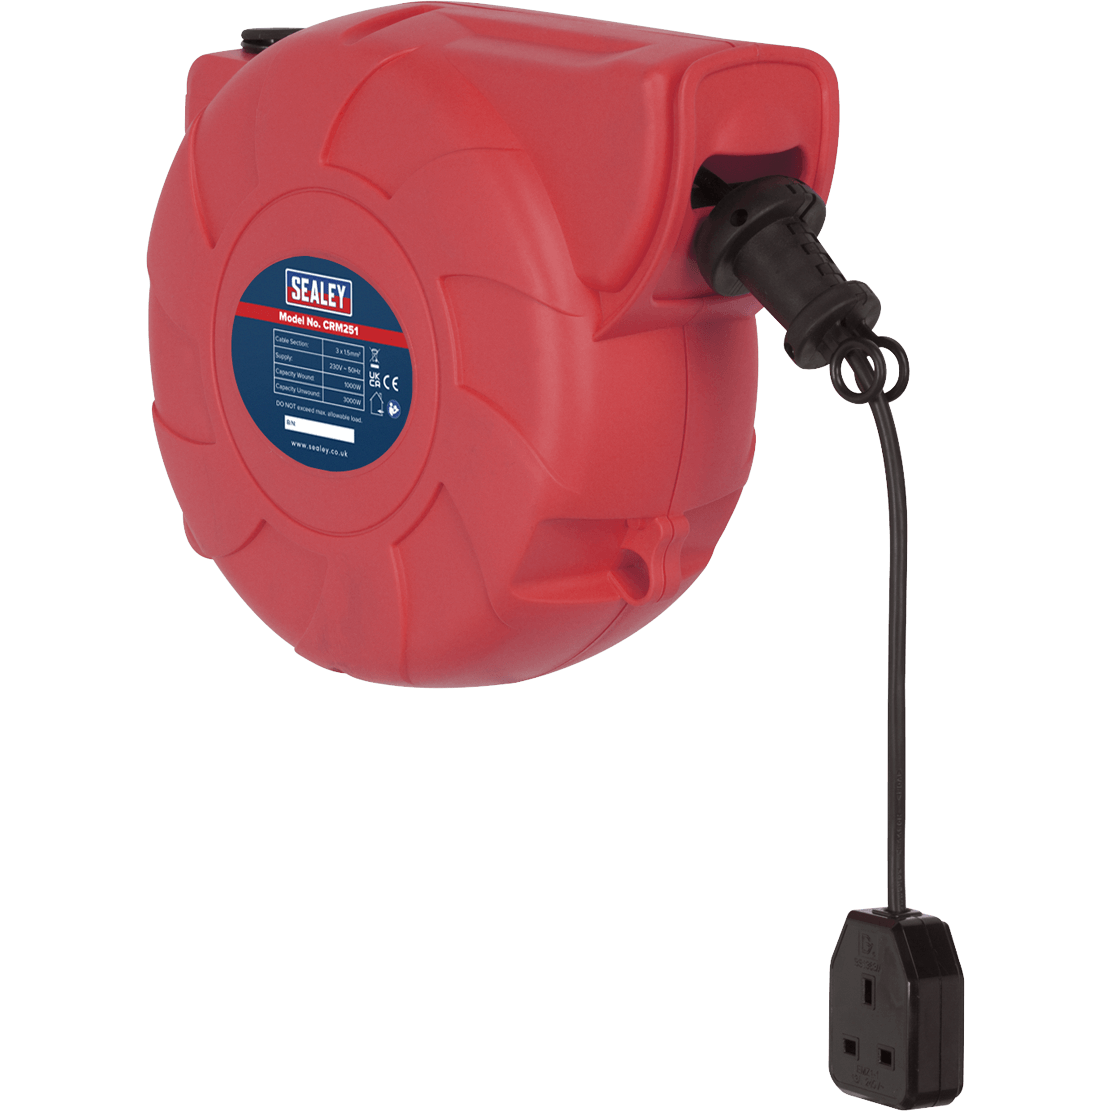 Sealey Wall Mounted Auto Cable Extension Reel 240v 25m